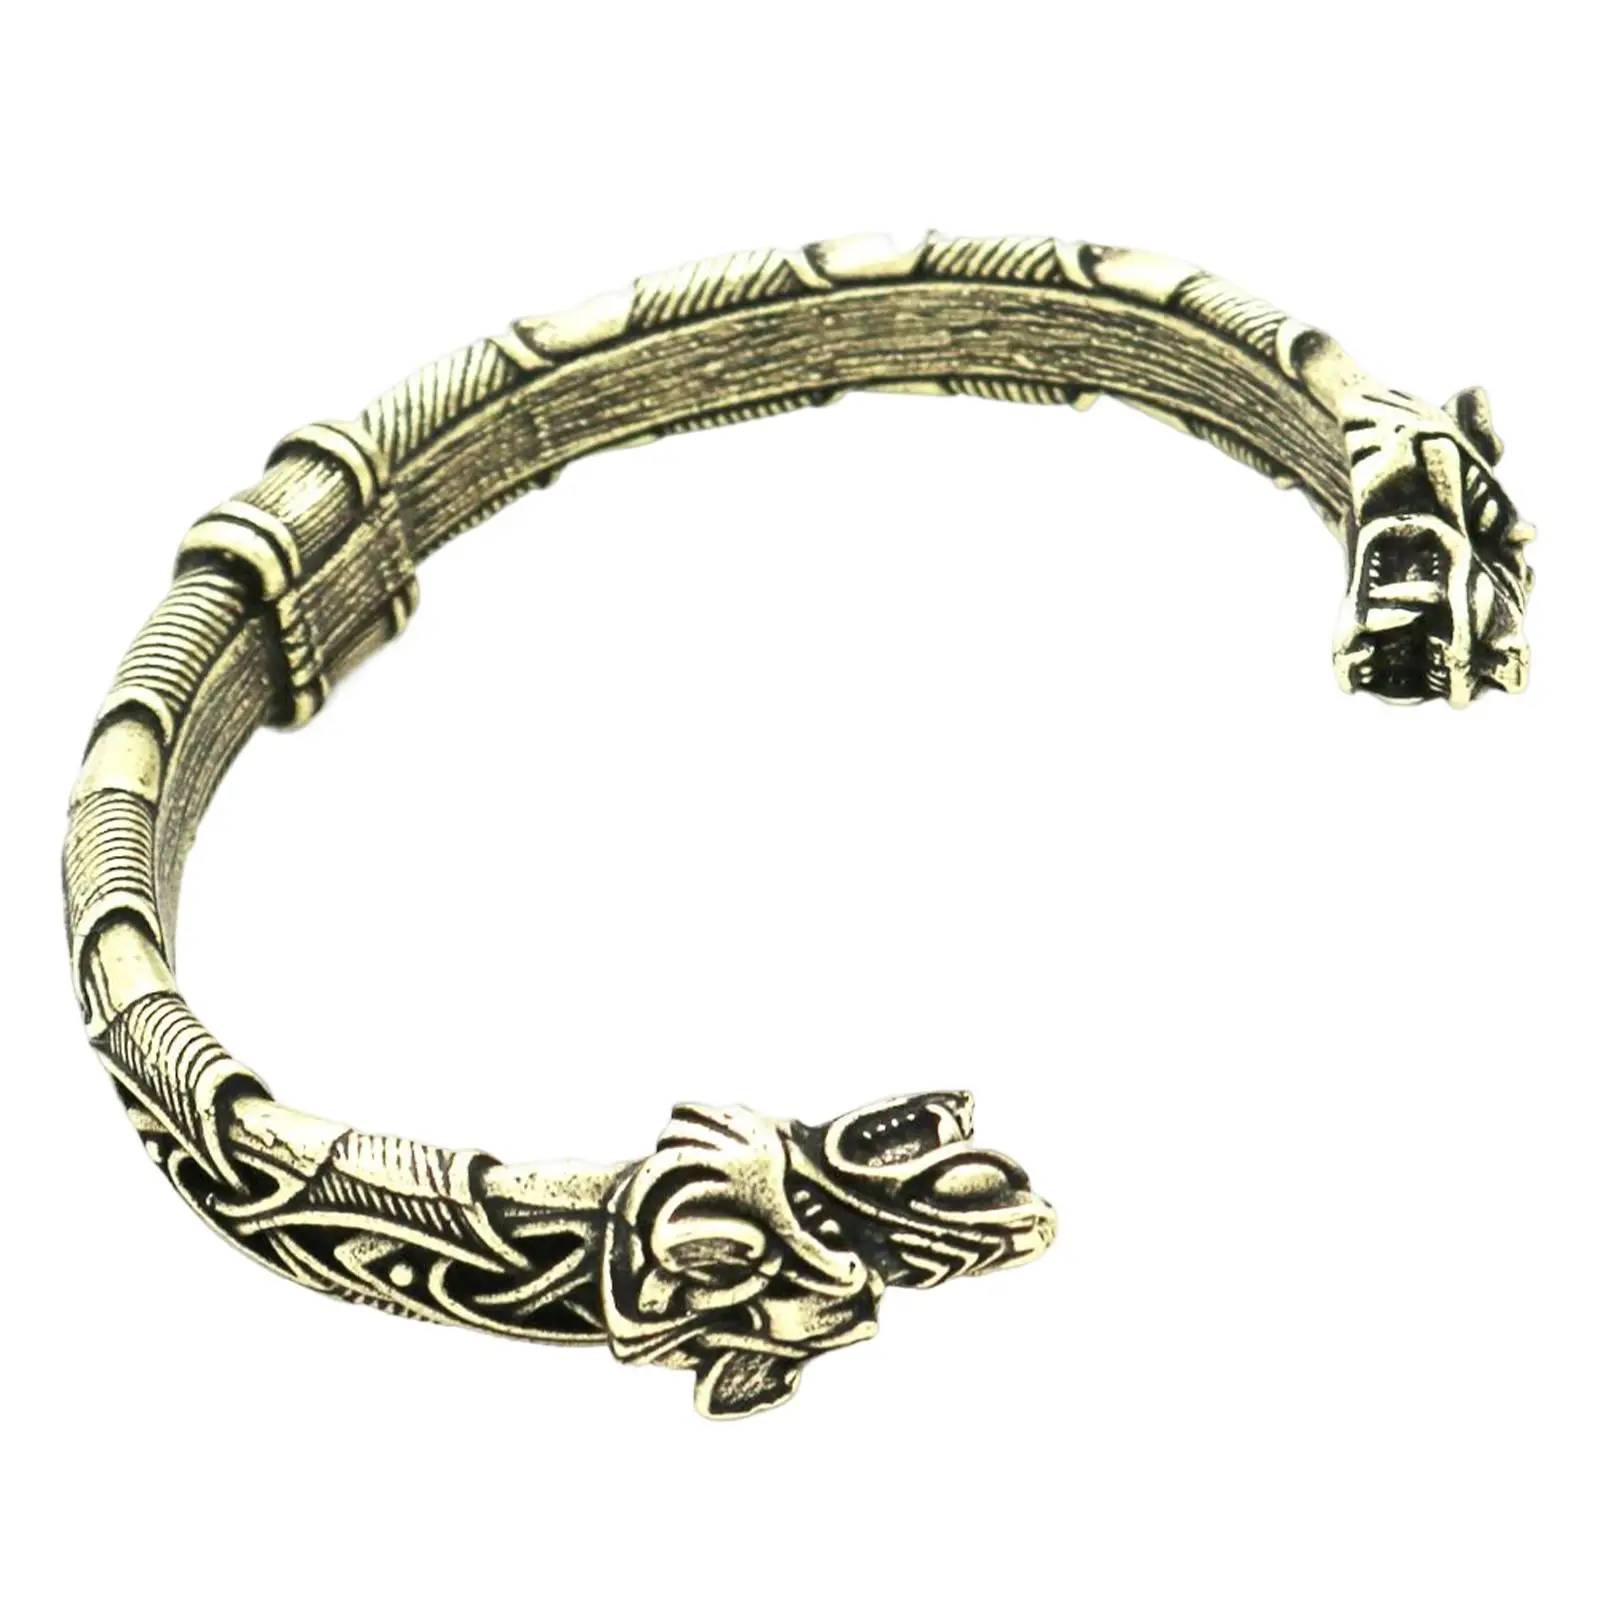  Mens Bracelet, Bangle Cuff Arm Wristband Bracelet Jewelry measures 7cm in diameter, can be adjusted to wrist.